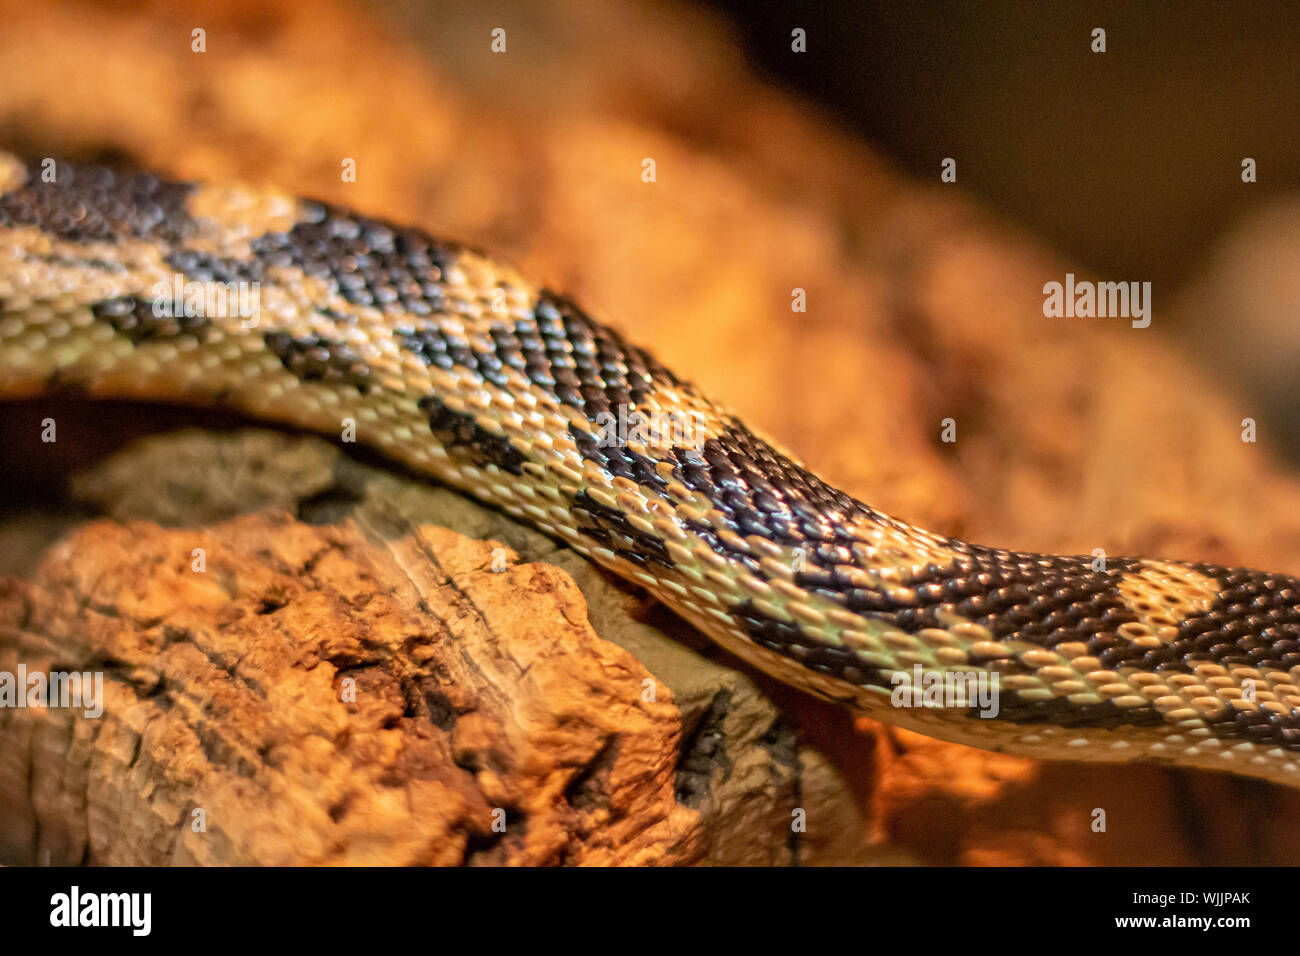 The body of a bullsnake is viewed up close as it slithers along a rock, showing its shiny scales and texture. Stock Photo